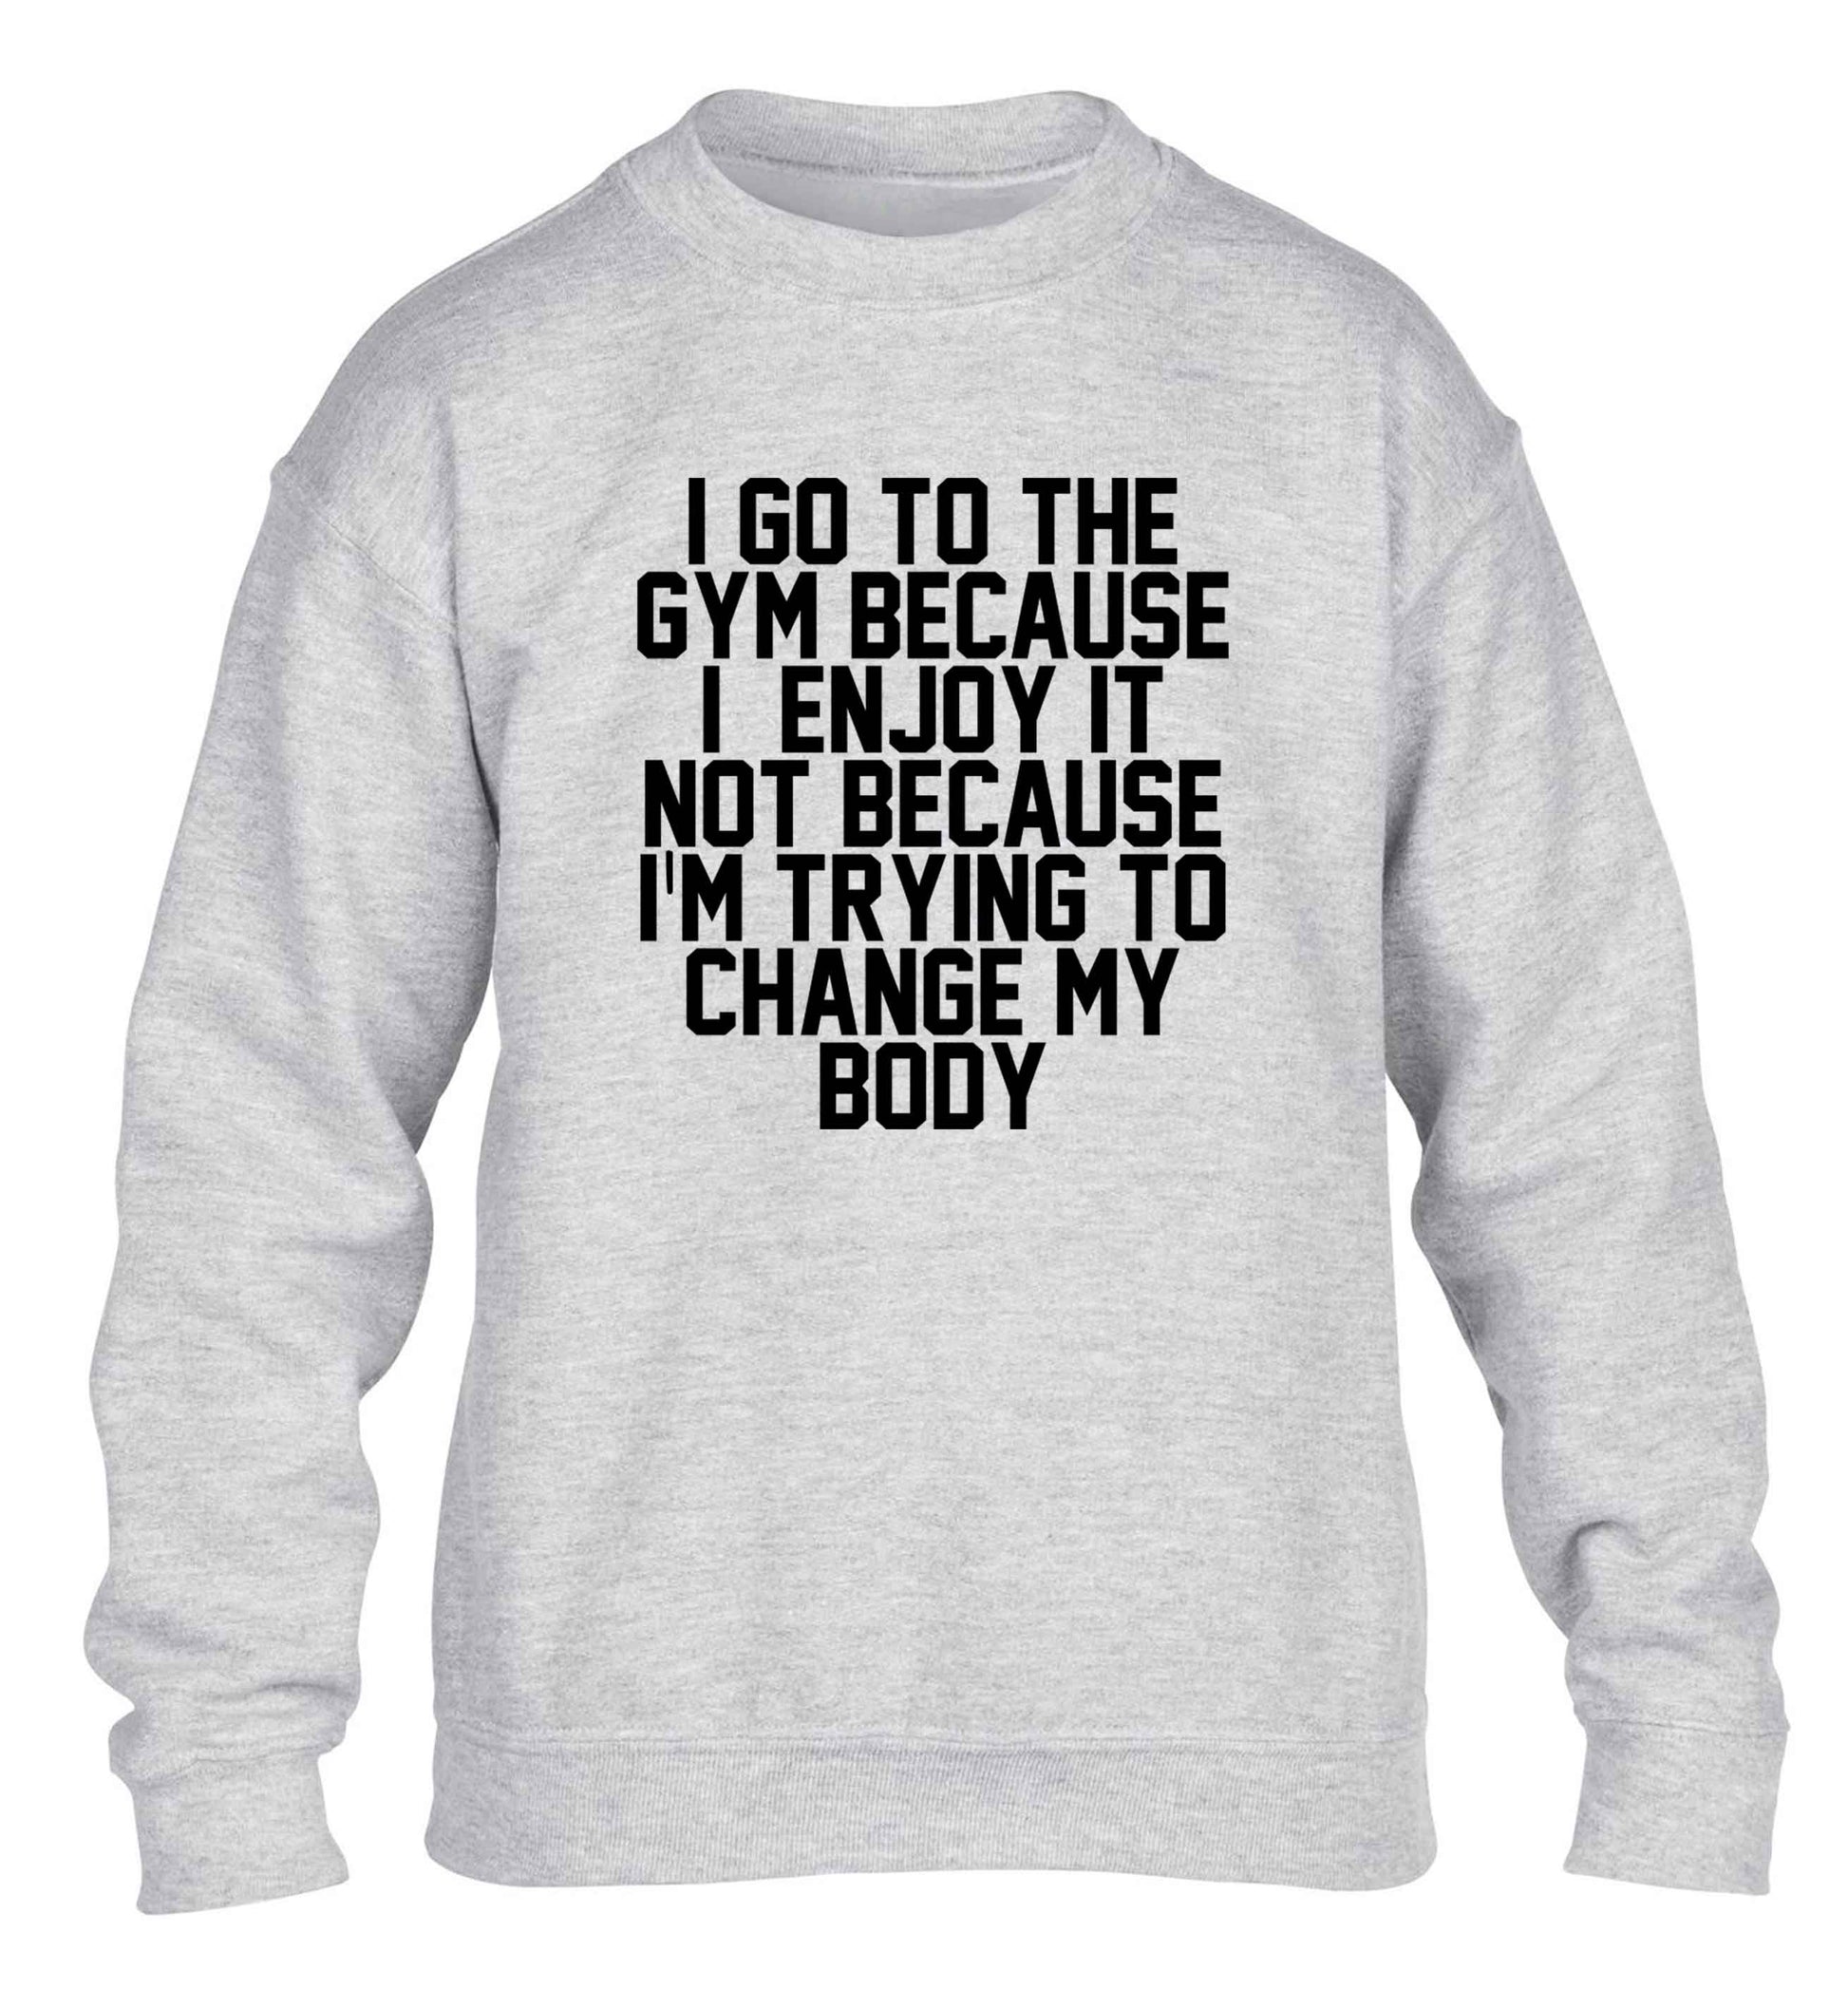 I go to the gym because I enjoy it not because I'm trying to change my body children's grey sweater 12-13 Years